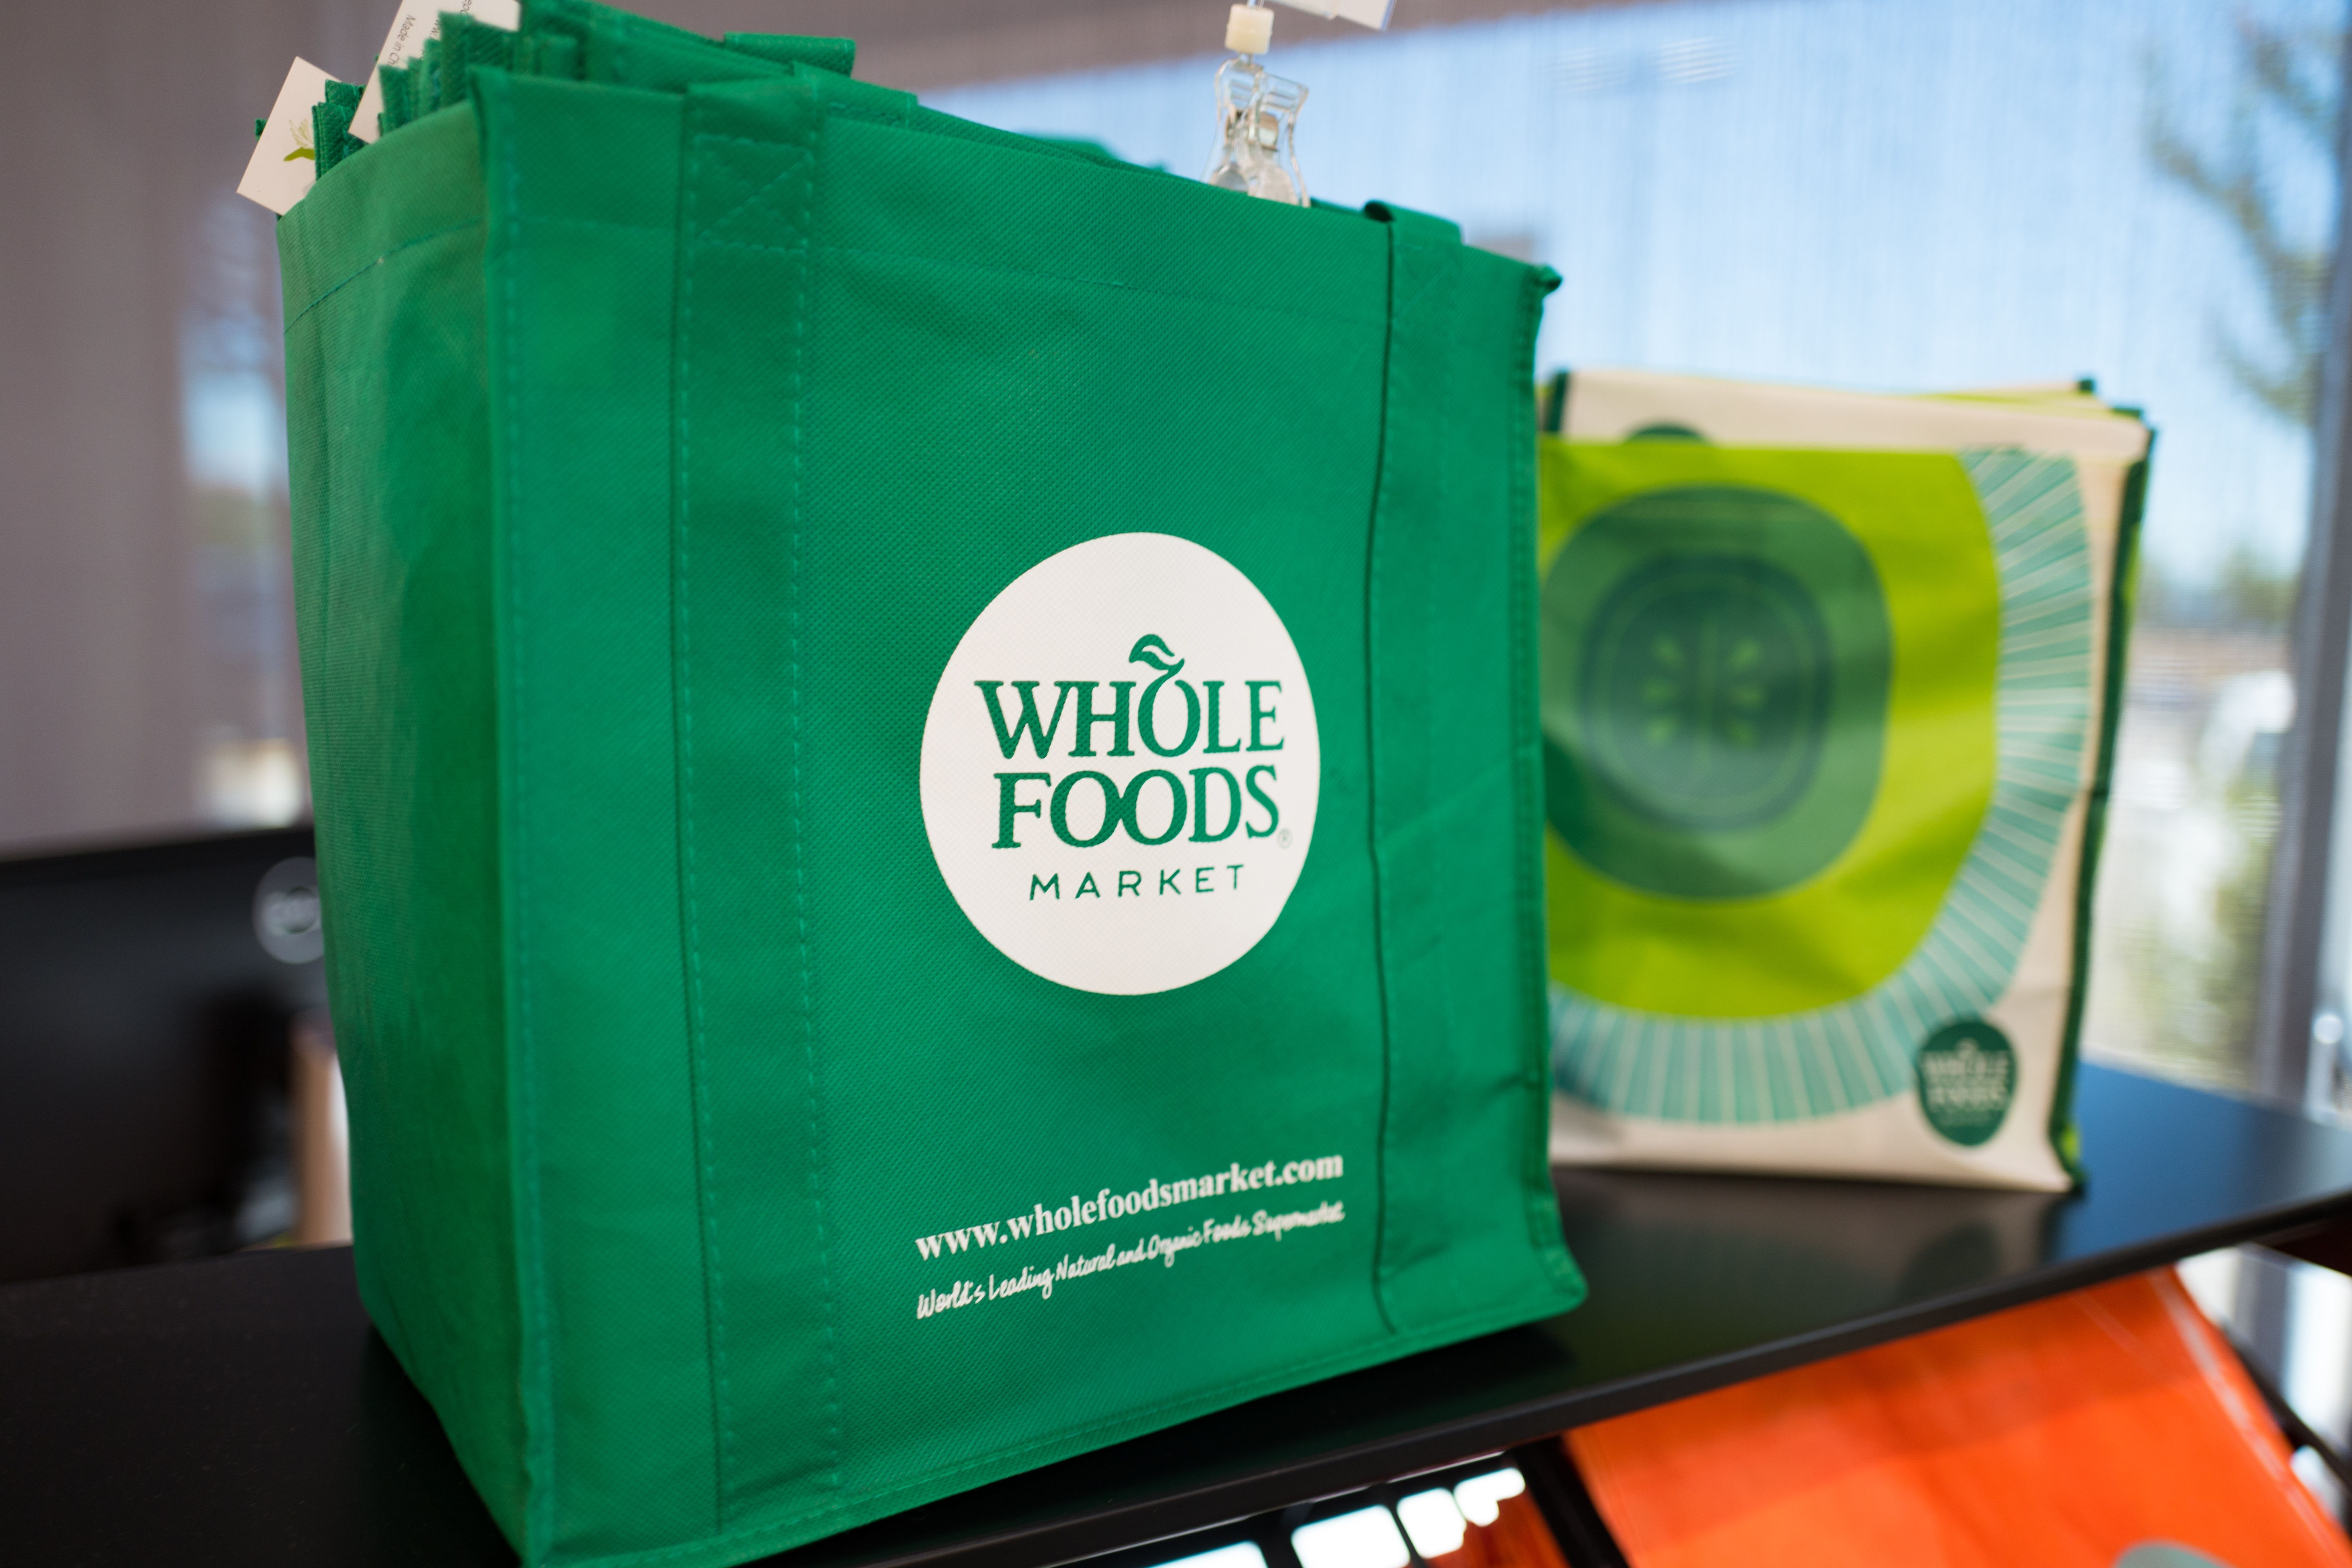 Offering Two-Hour Whole Foods Grocery Delivery Via  Prime Now